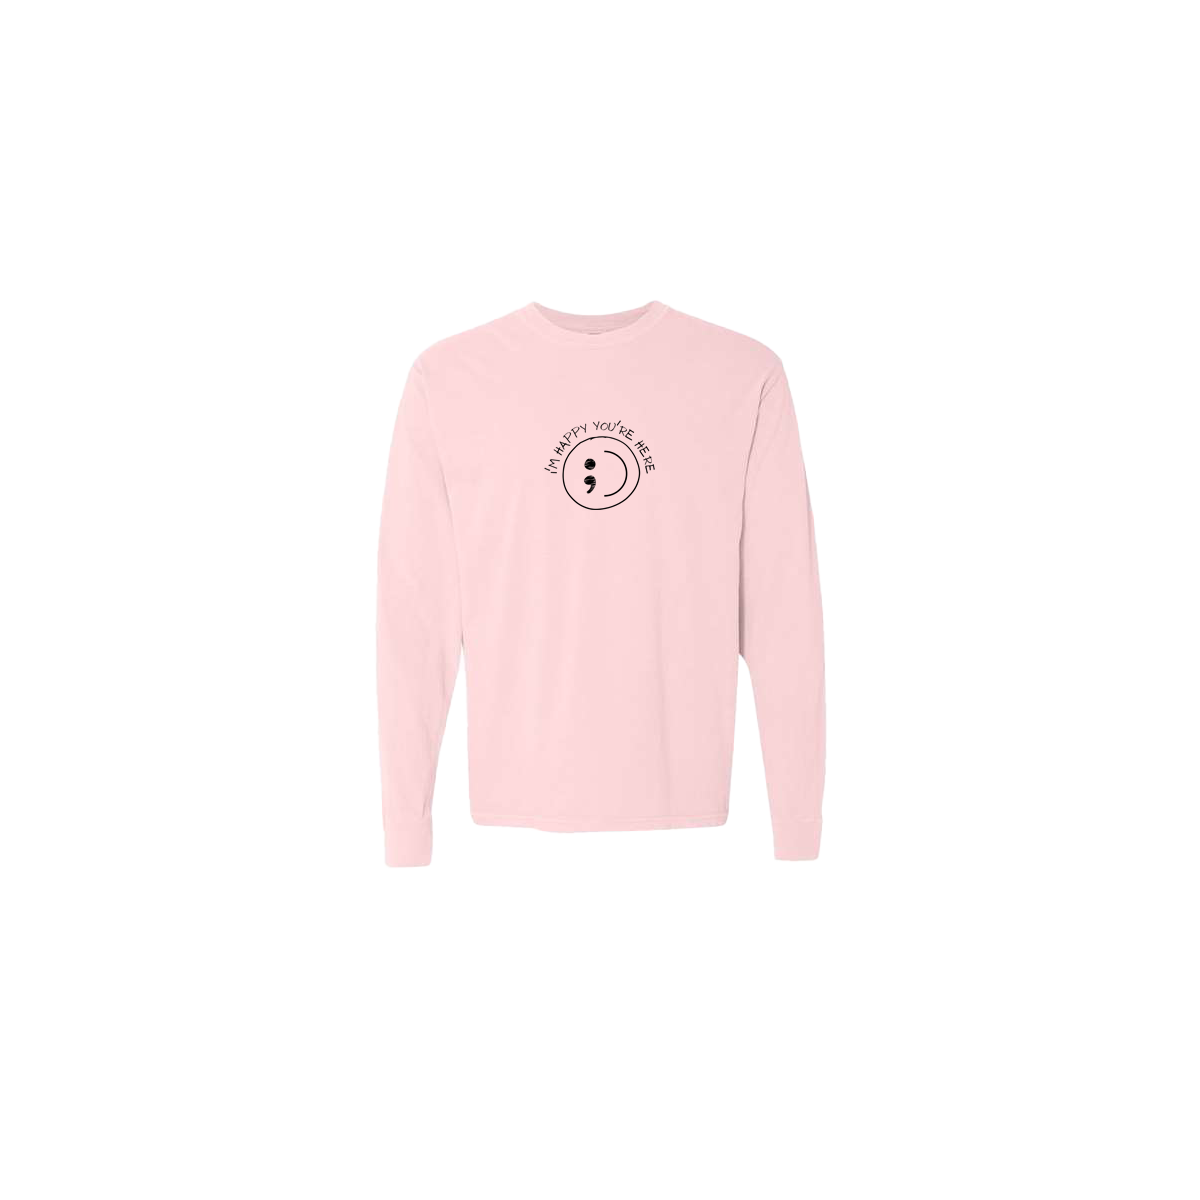 I'm Happy You're Here Embroidered Pink Long Sleeve Tshirt - Mental Health Awareness Clothing